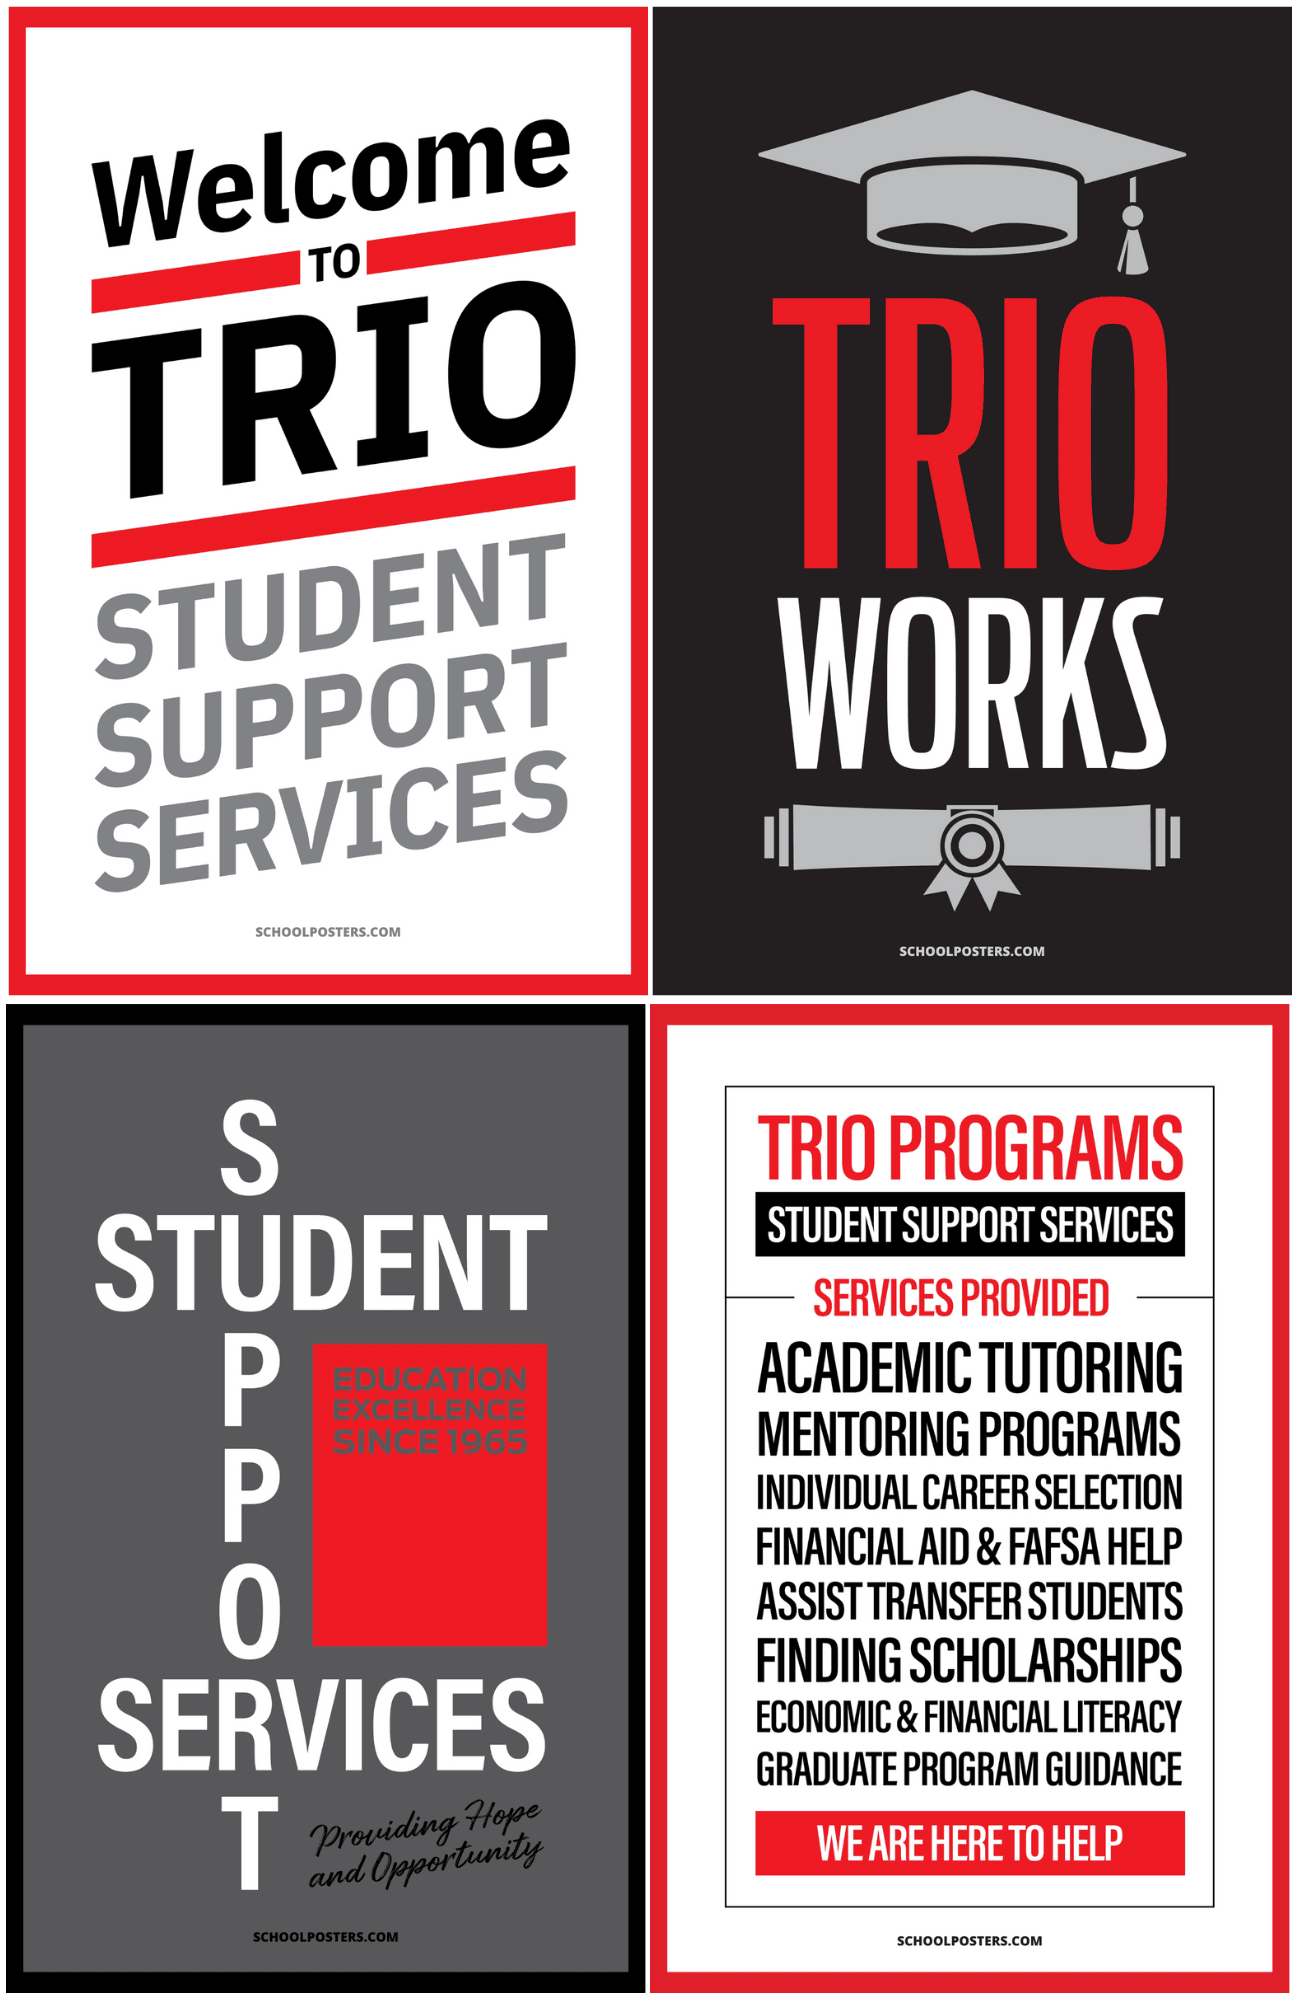 Student Support Services, TRiO